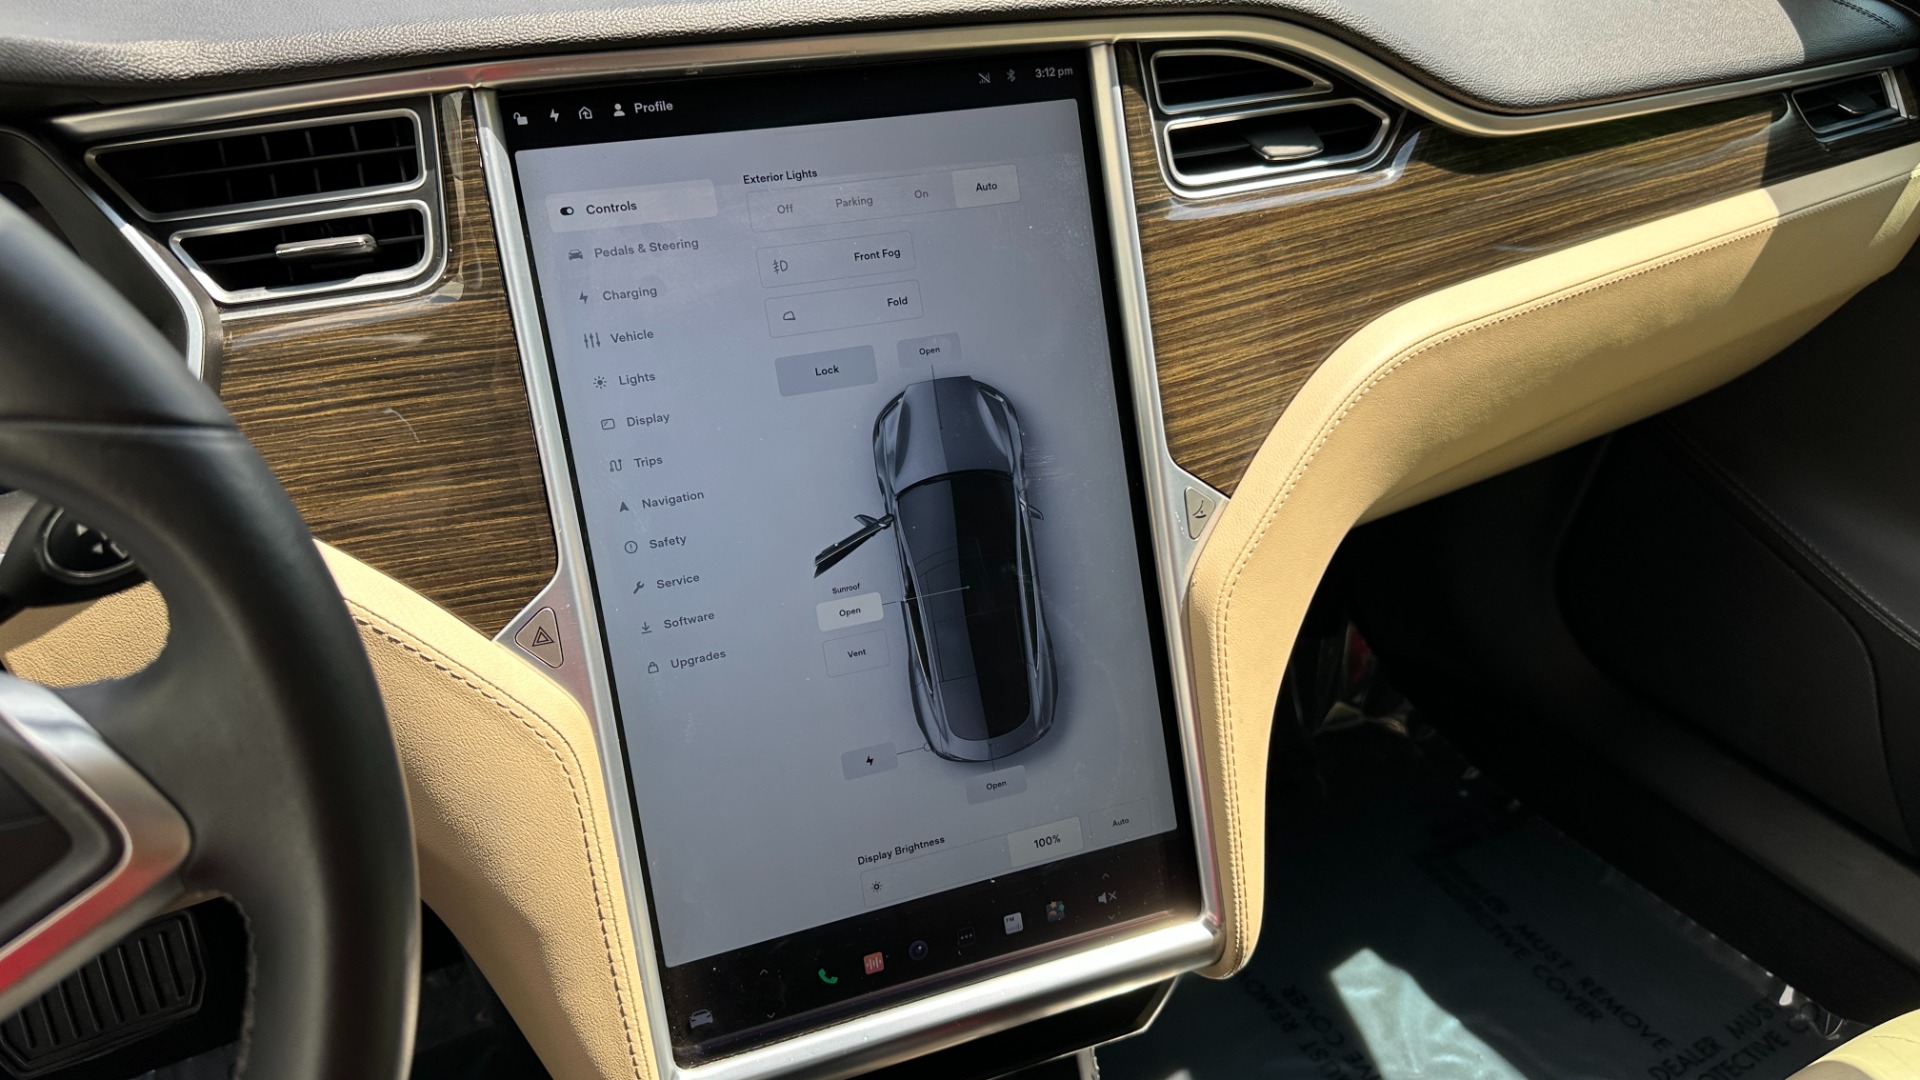 Used 2014 Tesla Model S 60 kWh Battery / 60D / PREMIUM CONNECTIVITY / LEATHER / SUNROOF for sale $19,995 at Formula Imports in Charlotte NC 28227 17